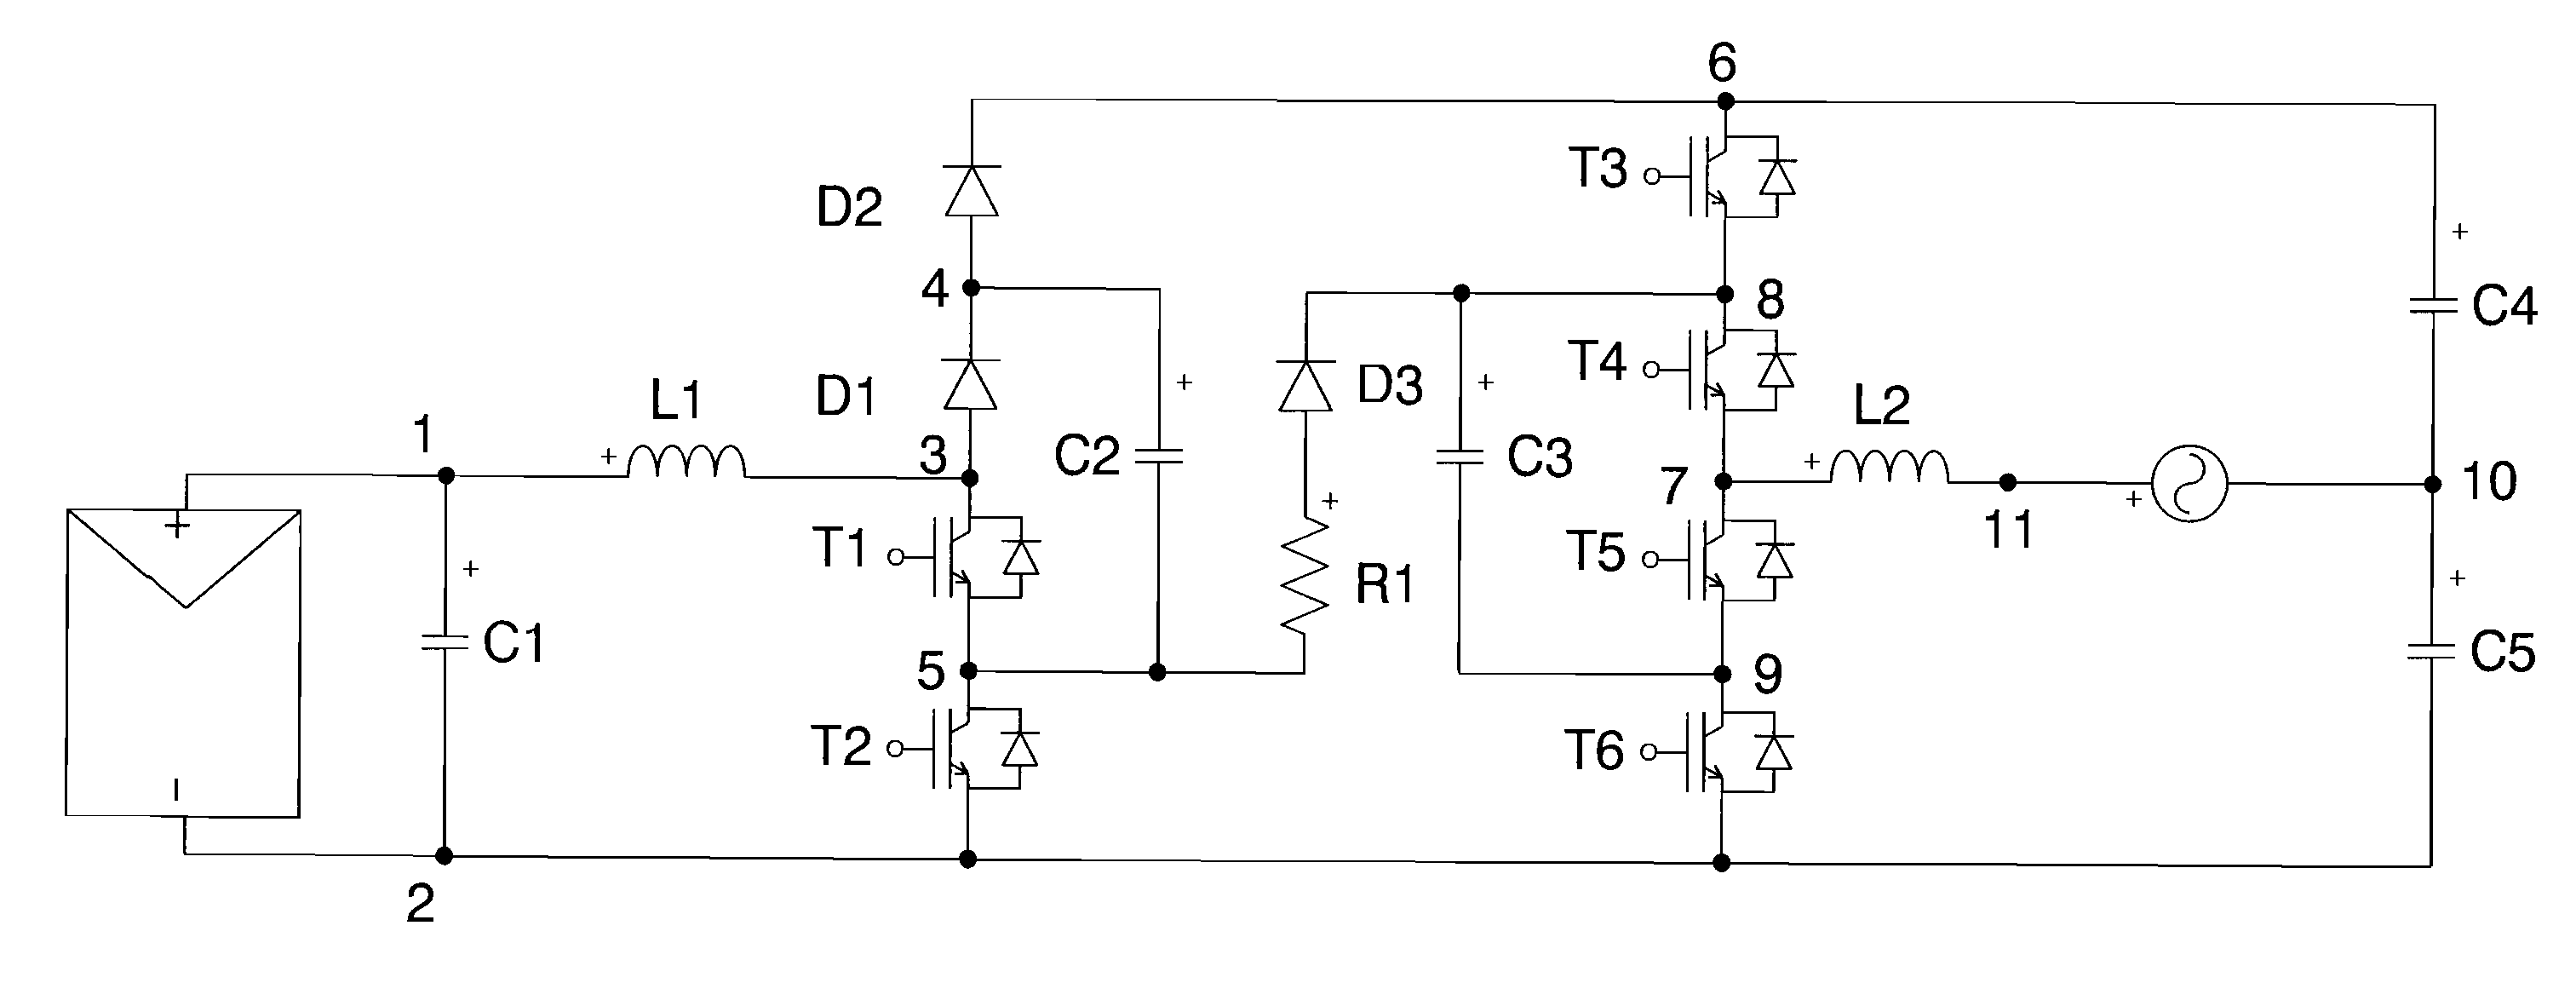 Electric circuit for converting direct current into alternating current